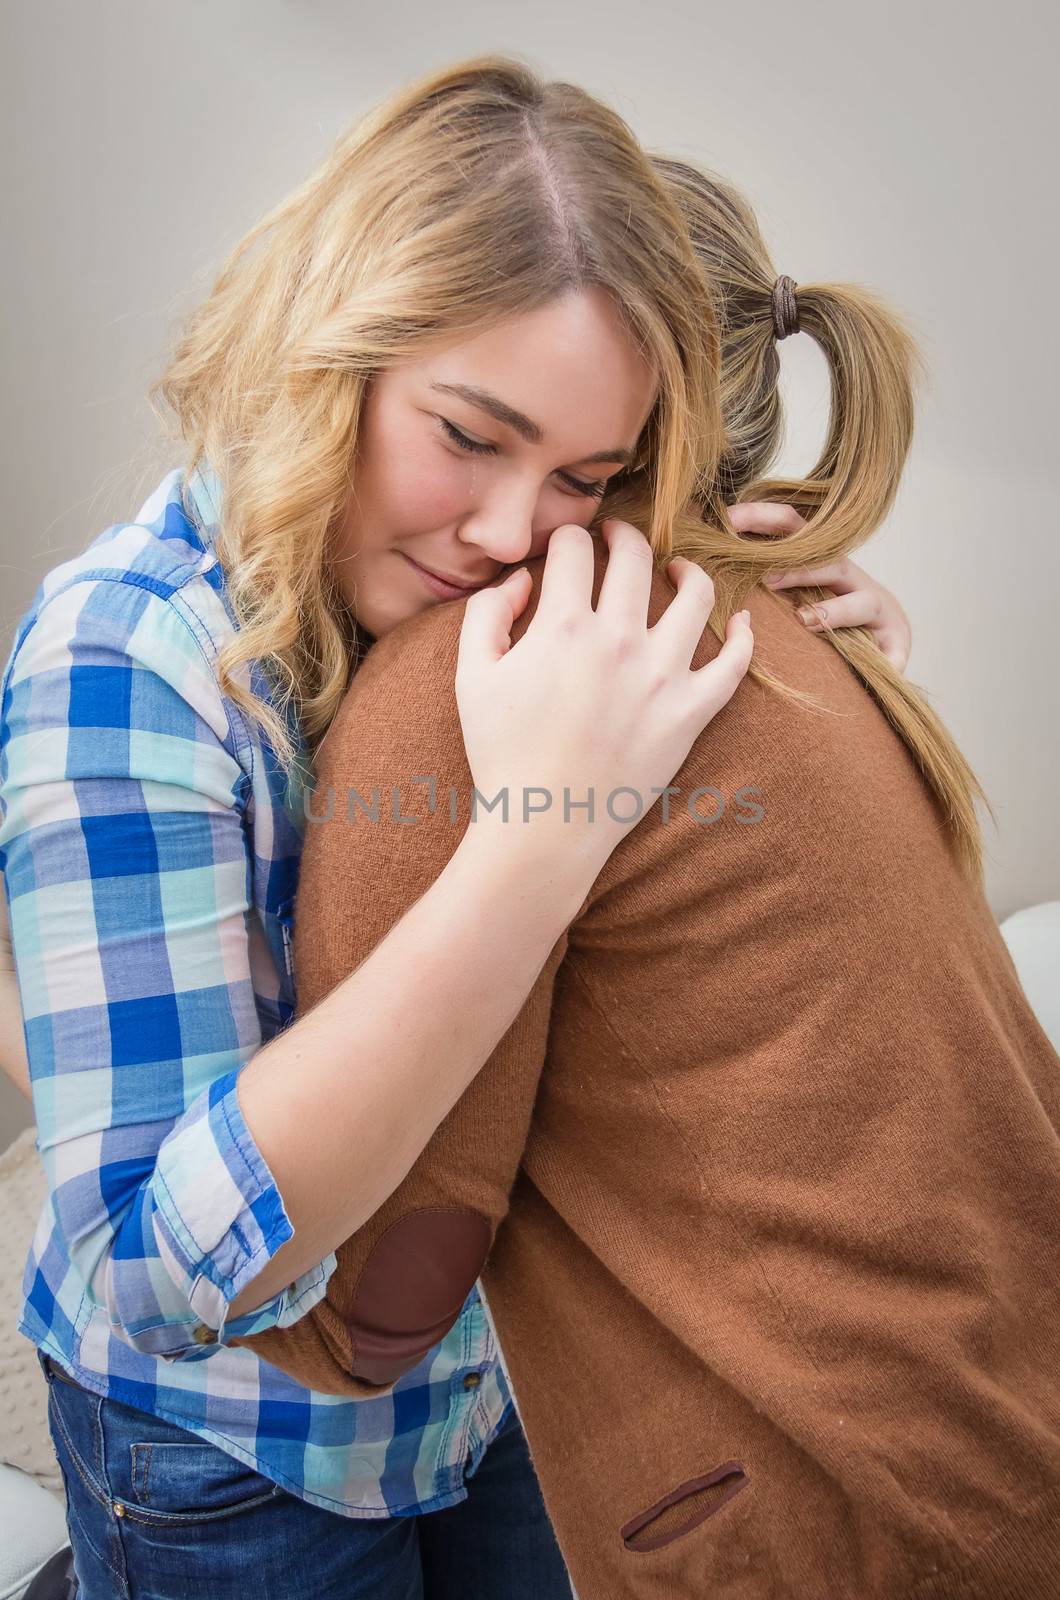 Closeup on sad teen daughter crying by problems in the shoulder of her mother. Mother embracing and consoling daughter.